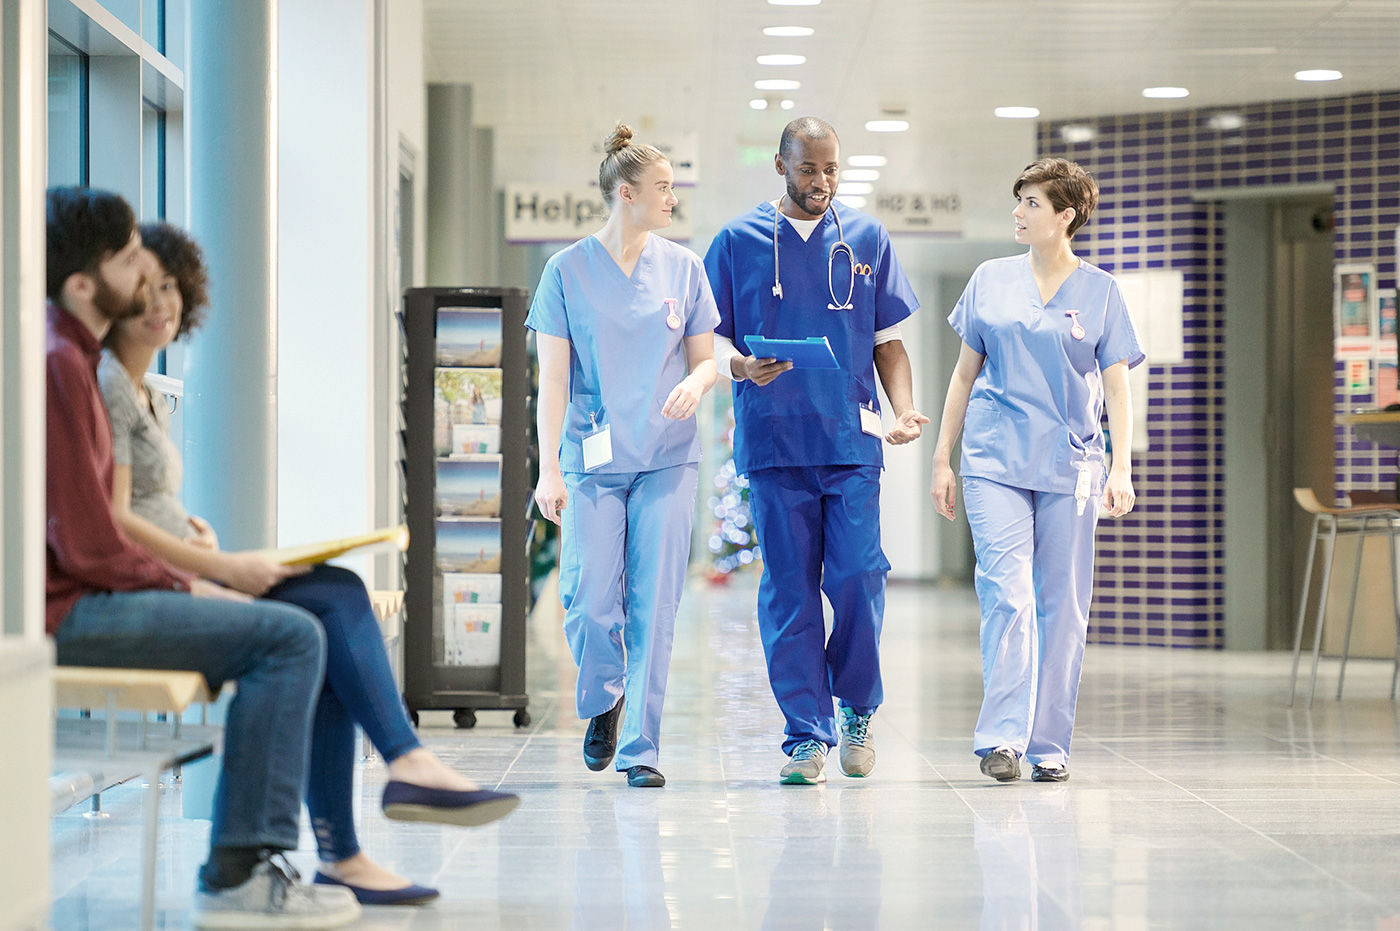 Three healthcare workers walking in a hospital and discussing files.